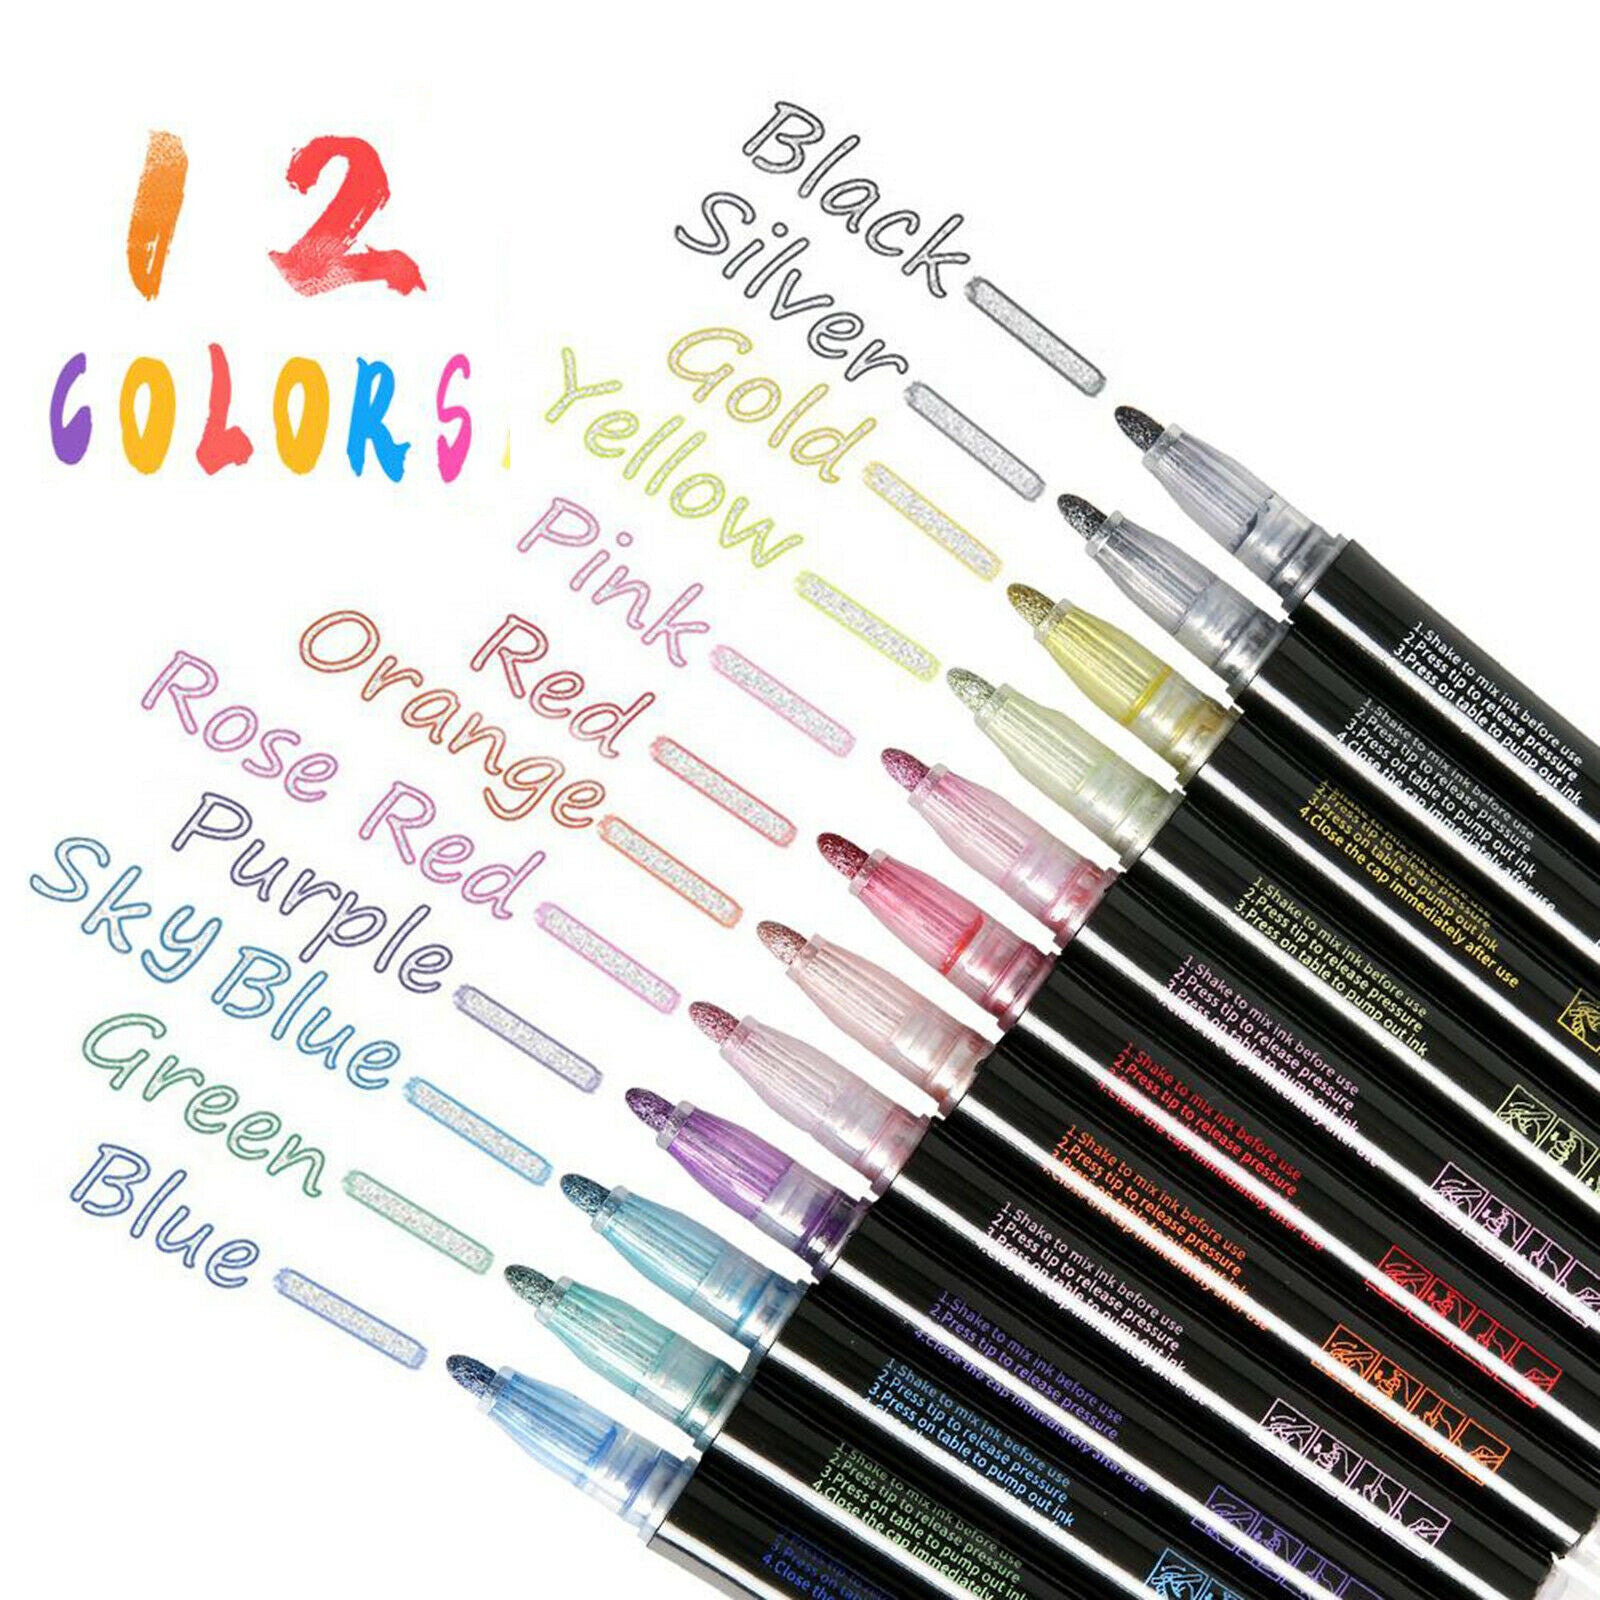 Double Line Outline Pens, 12 Colors Self-Outline Metallic Markers Glitter